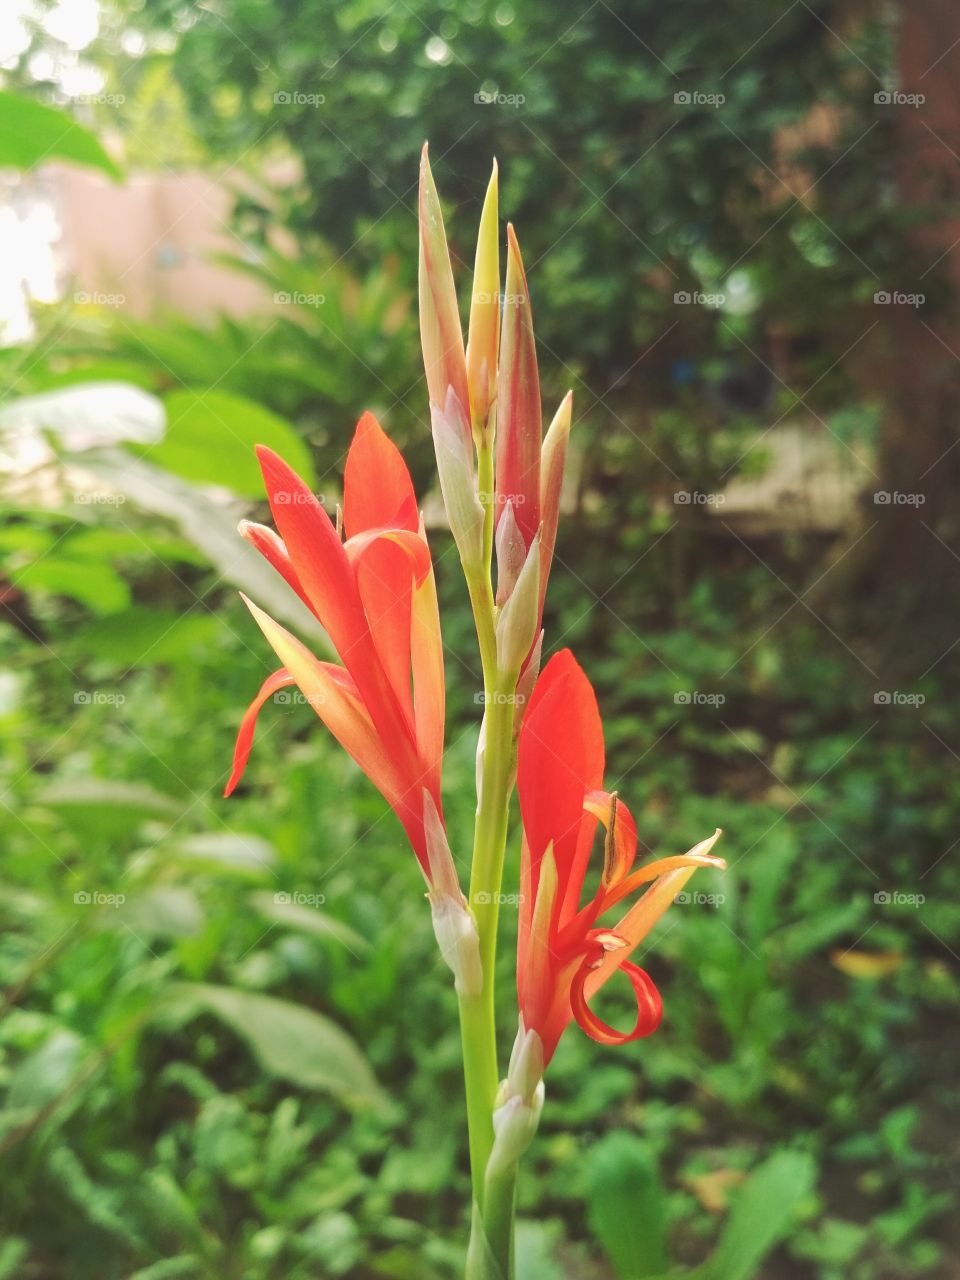 watching growing nature through camera lense is always felt beautiful and satisfactory to me dosent matter i am shooting with dslr or doing mobile photography ... Shot by Redmi 4x pro 😊 👆🙏